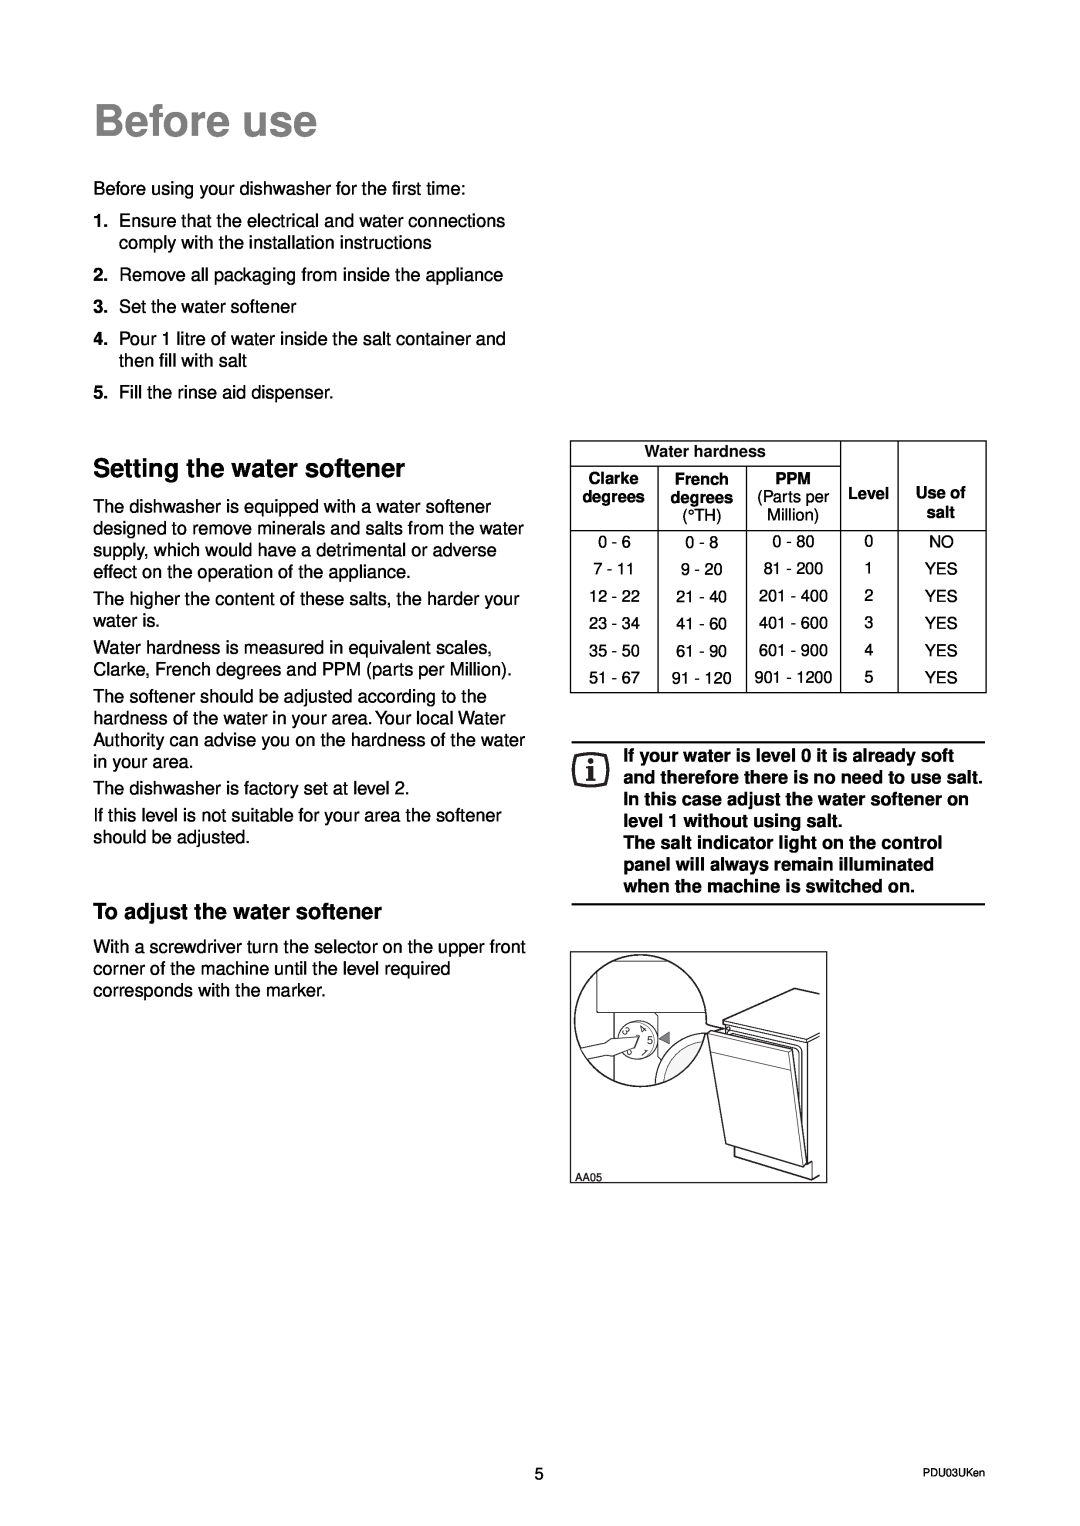 Zanussi DWS 949 manual Before use, Setting the water softener, To adjust the water softener 